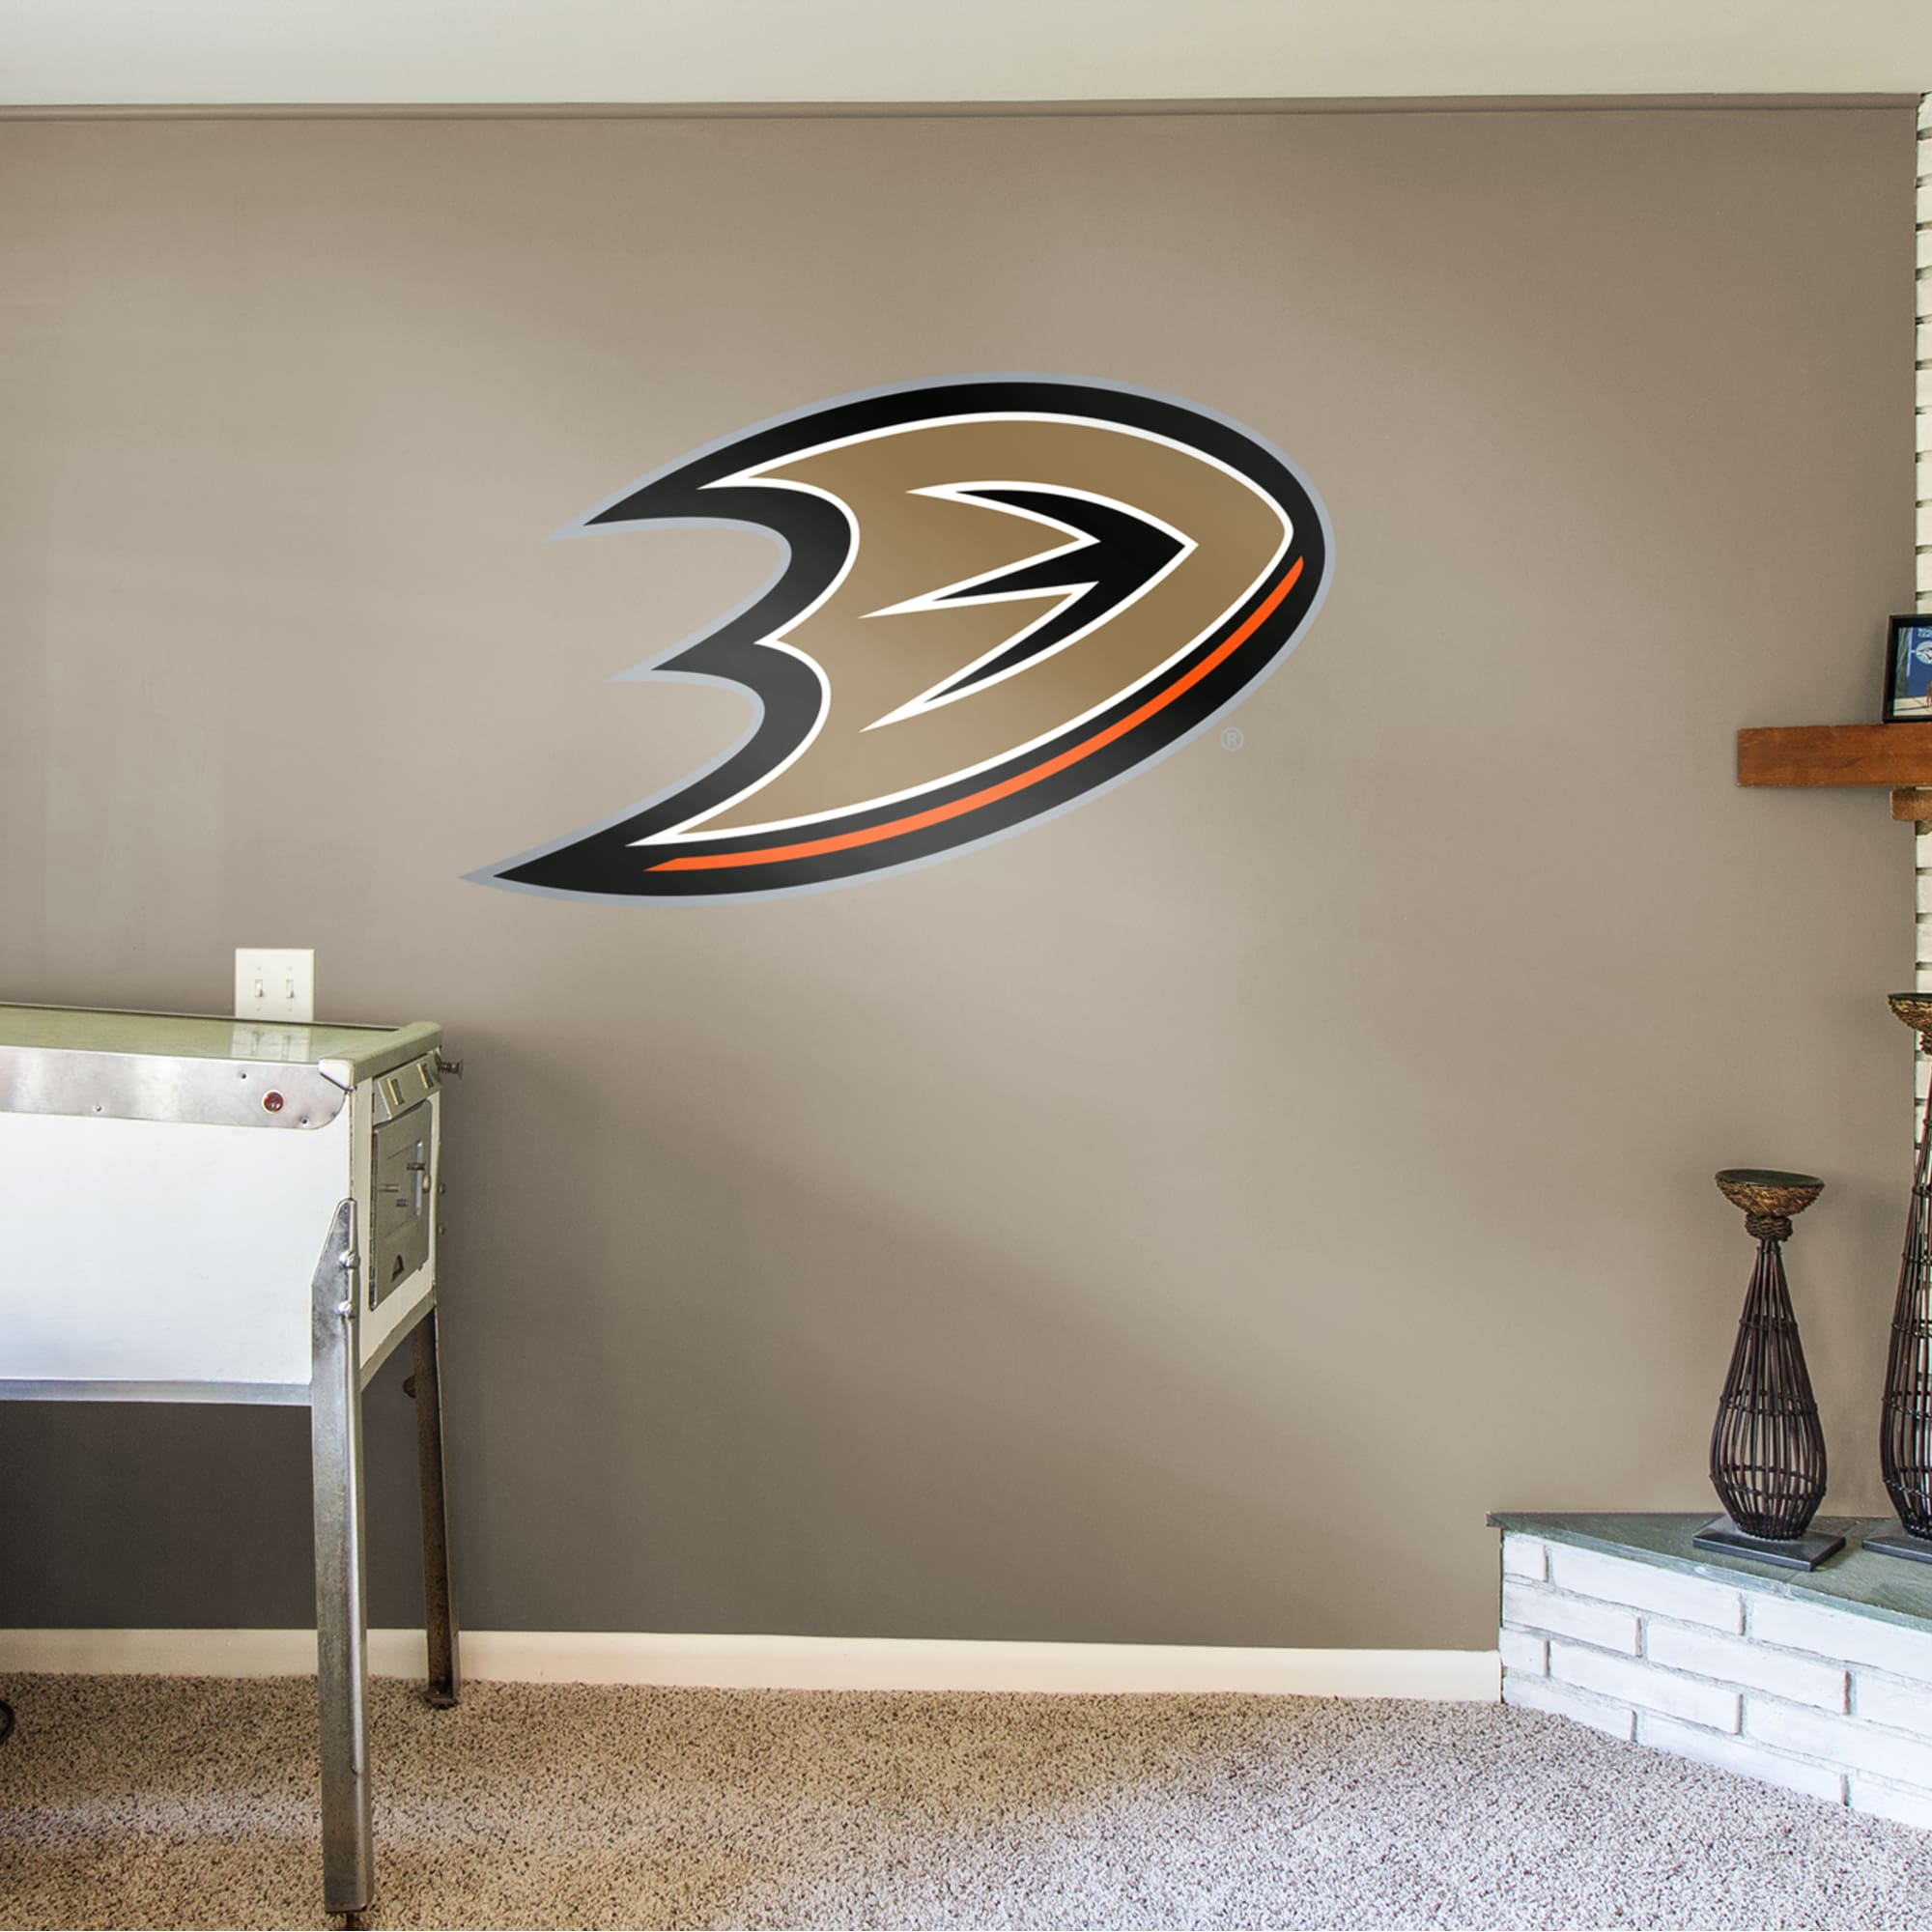 Anaheim Ducks: Logo - Officially Licensed NHL Removable Wall Decal 56.0"W x 33.0"H by Fathead | Metal/Vinyl